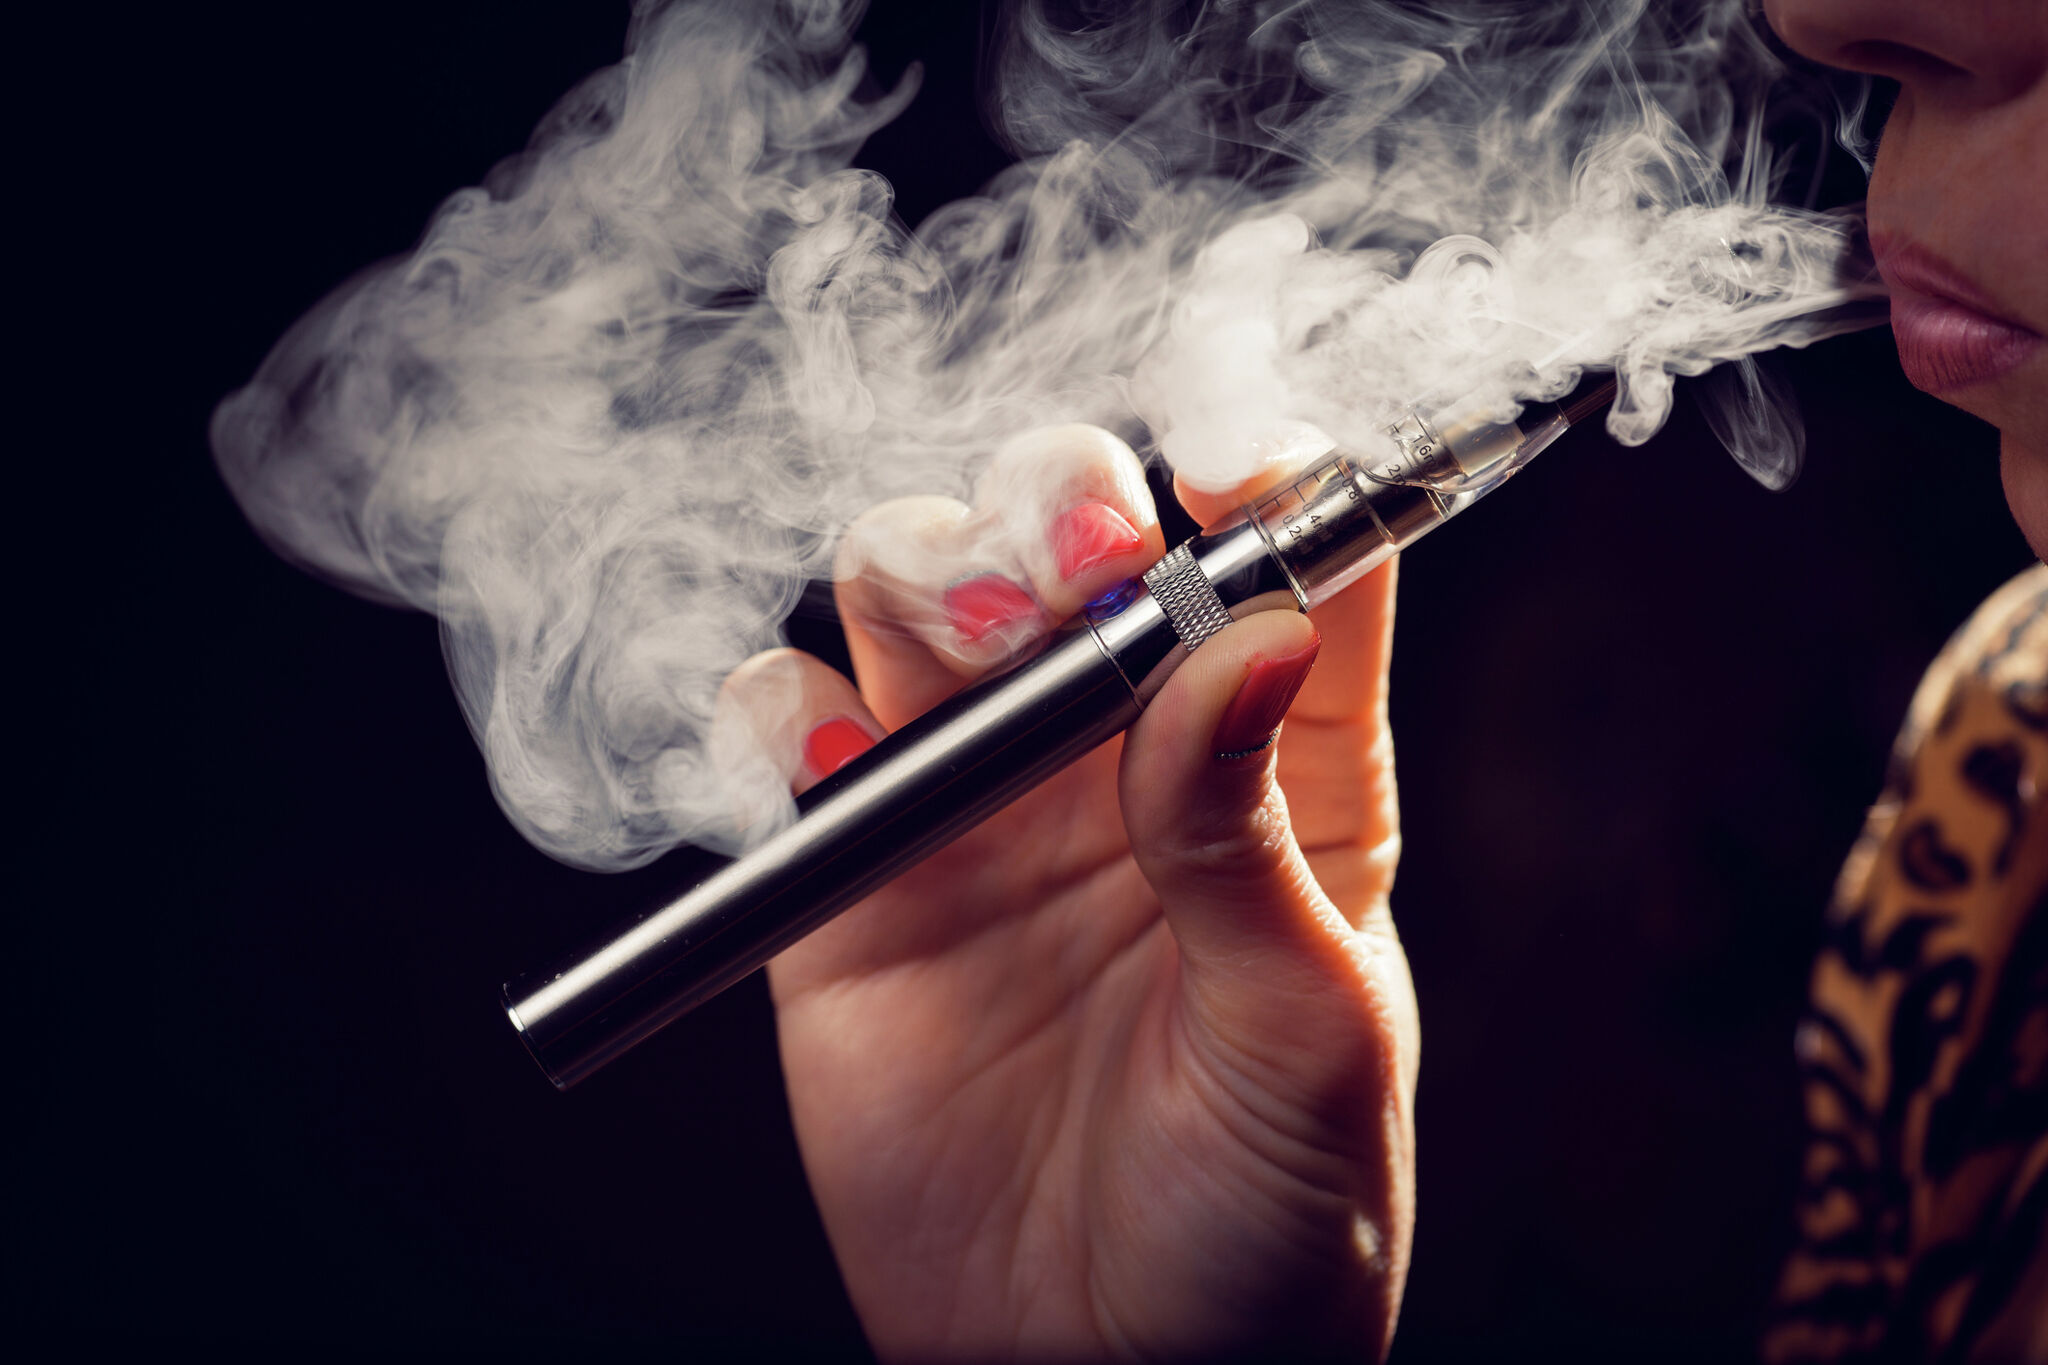 Comal County high schoolers are jailed on felony charges for vaping what could be legal hemp